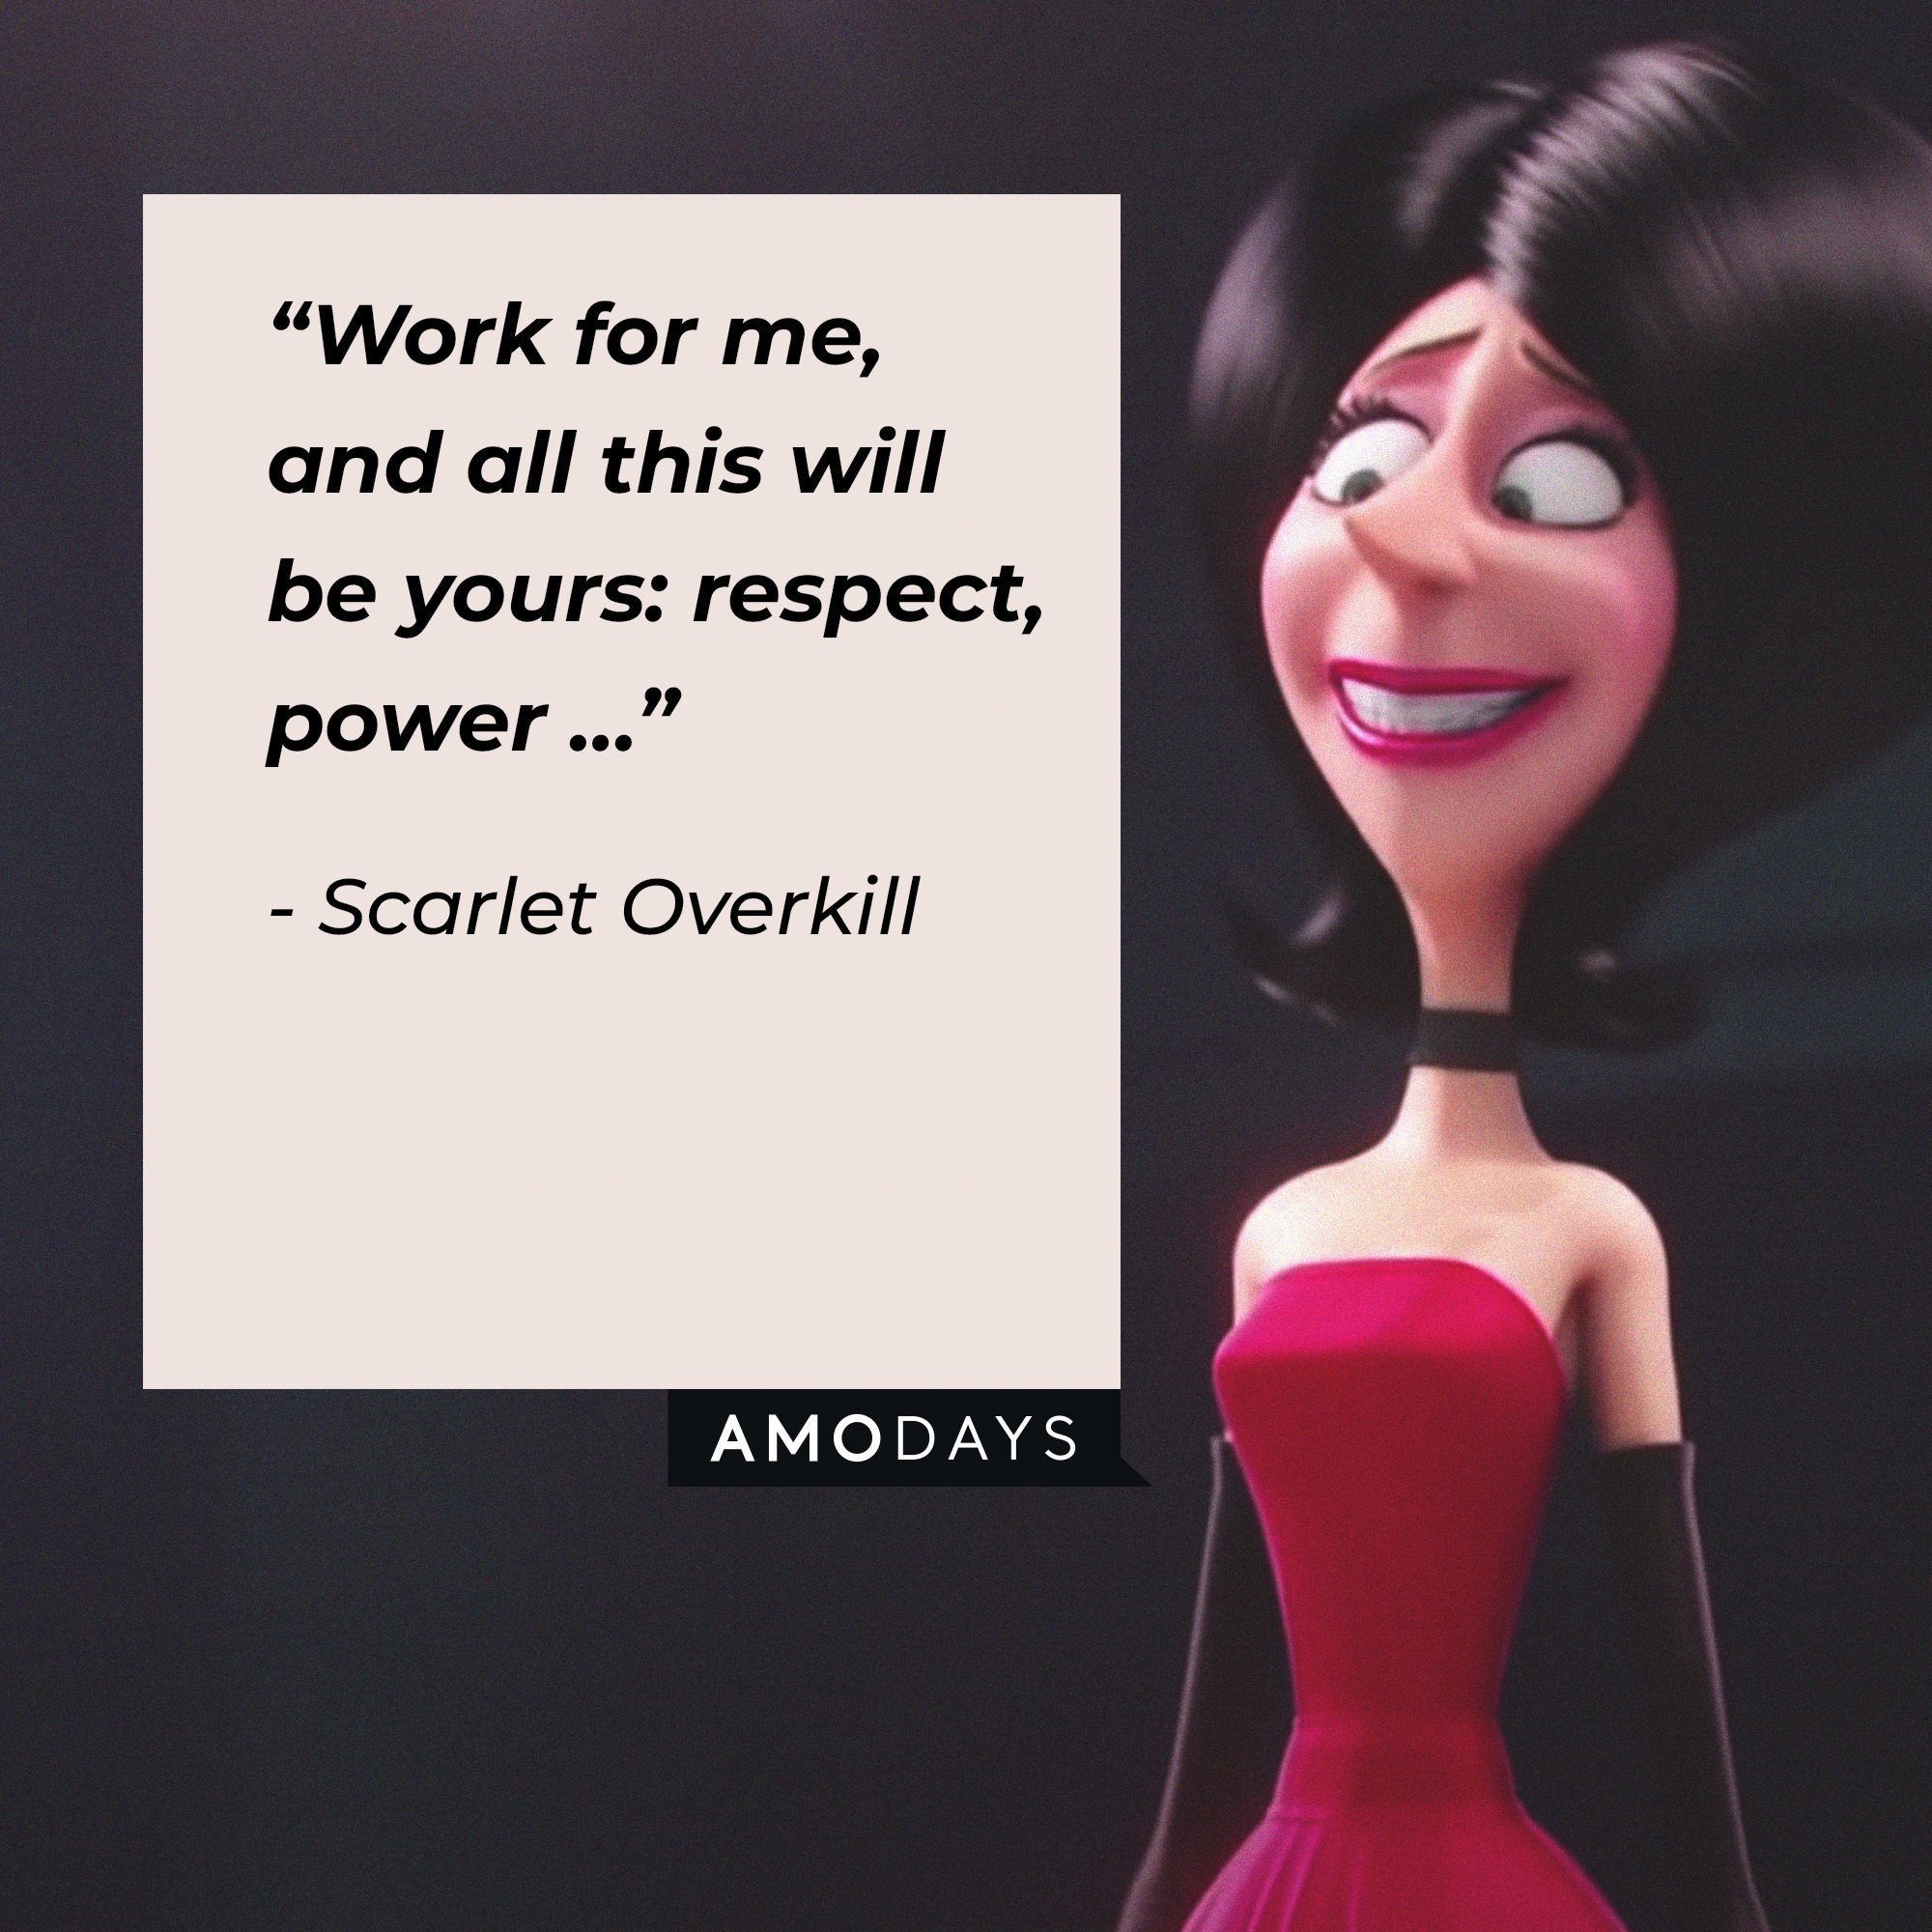 Scarlet Overkill's quote: “Work for me, and all this will be yours: respect, power …” | Image: AmoDays